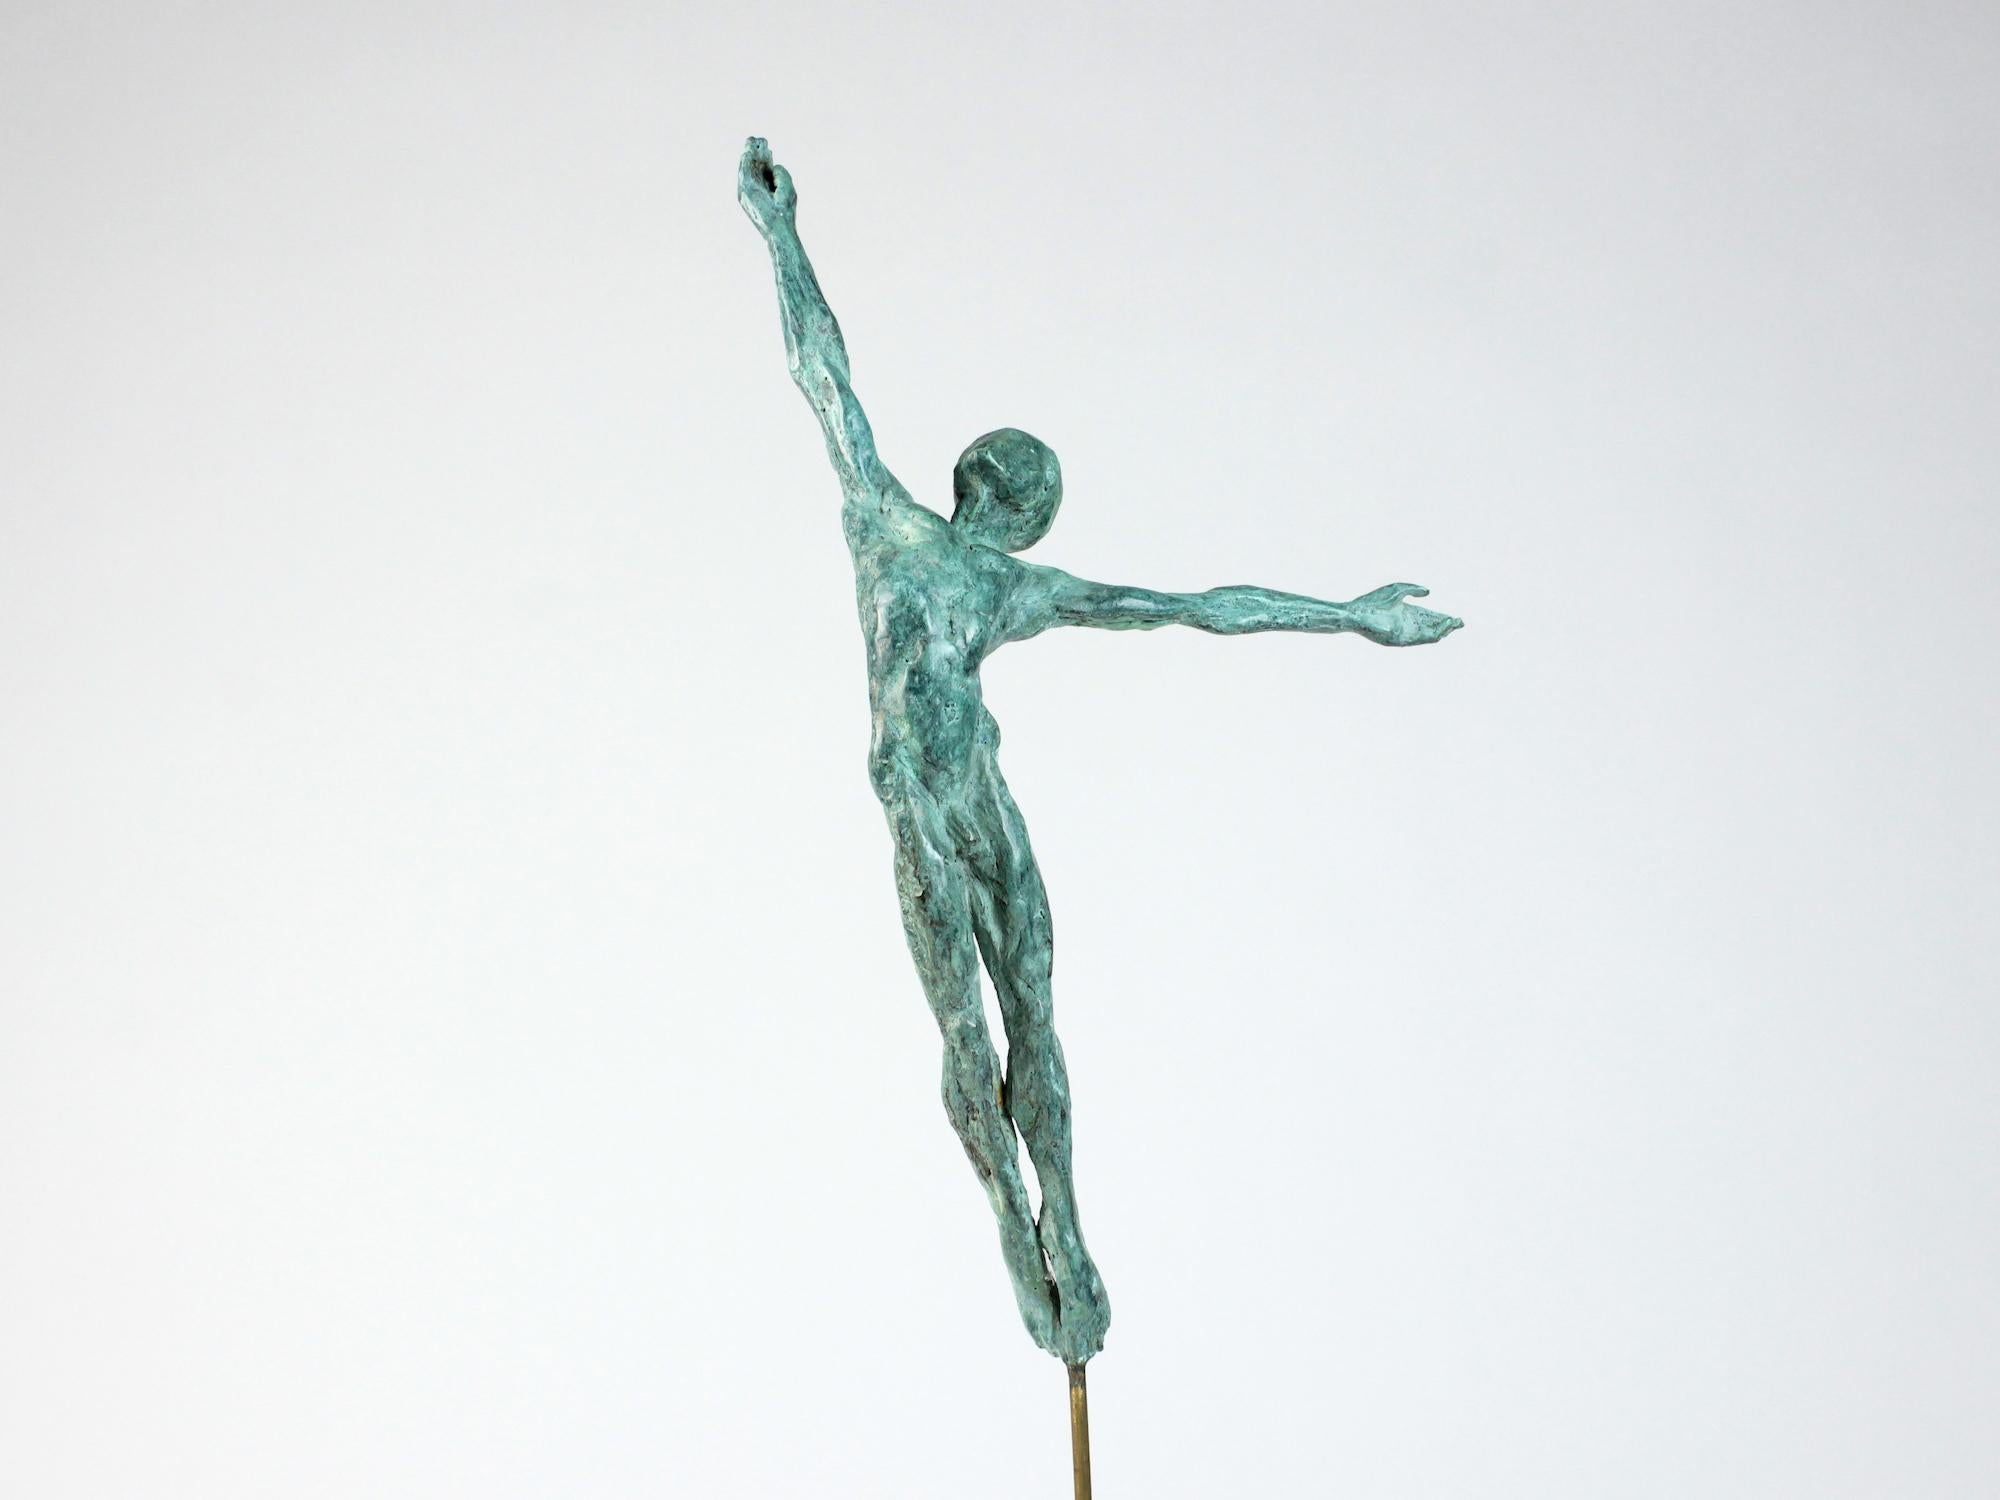 Danseur Attirance II is a bronze sculpture by contemporary artist Yann Guillon, dimensions are 35 × 23 × 9 cm (13.8 × 9.1 × 3.5 in). Height of the sculpture with the metal base: 51 cm (20 in). 
The sculpture is signed and numbered, it is part of a